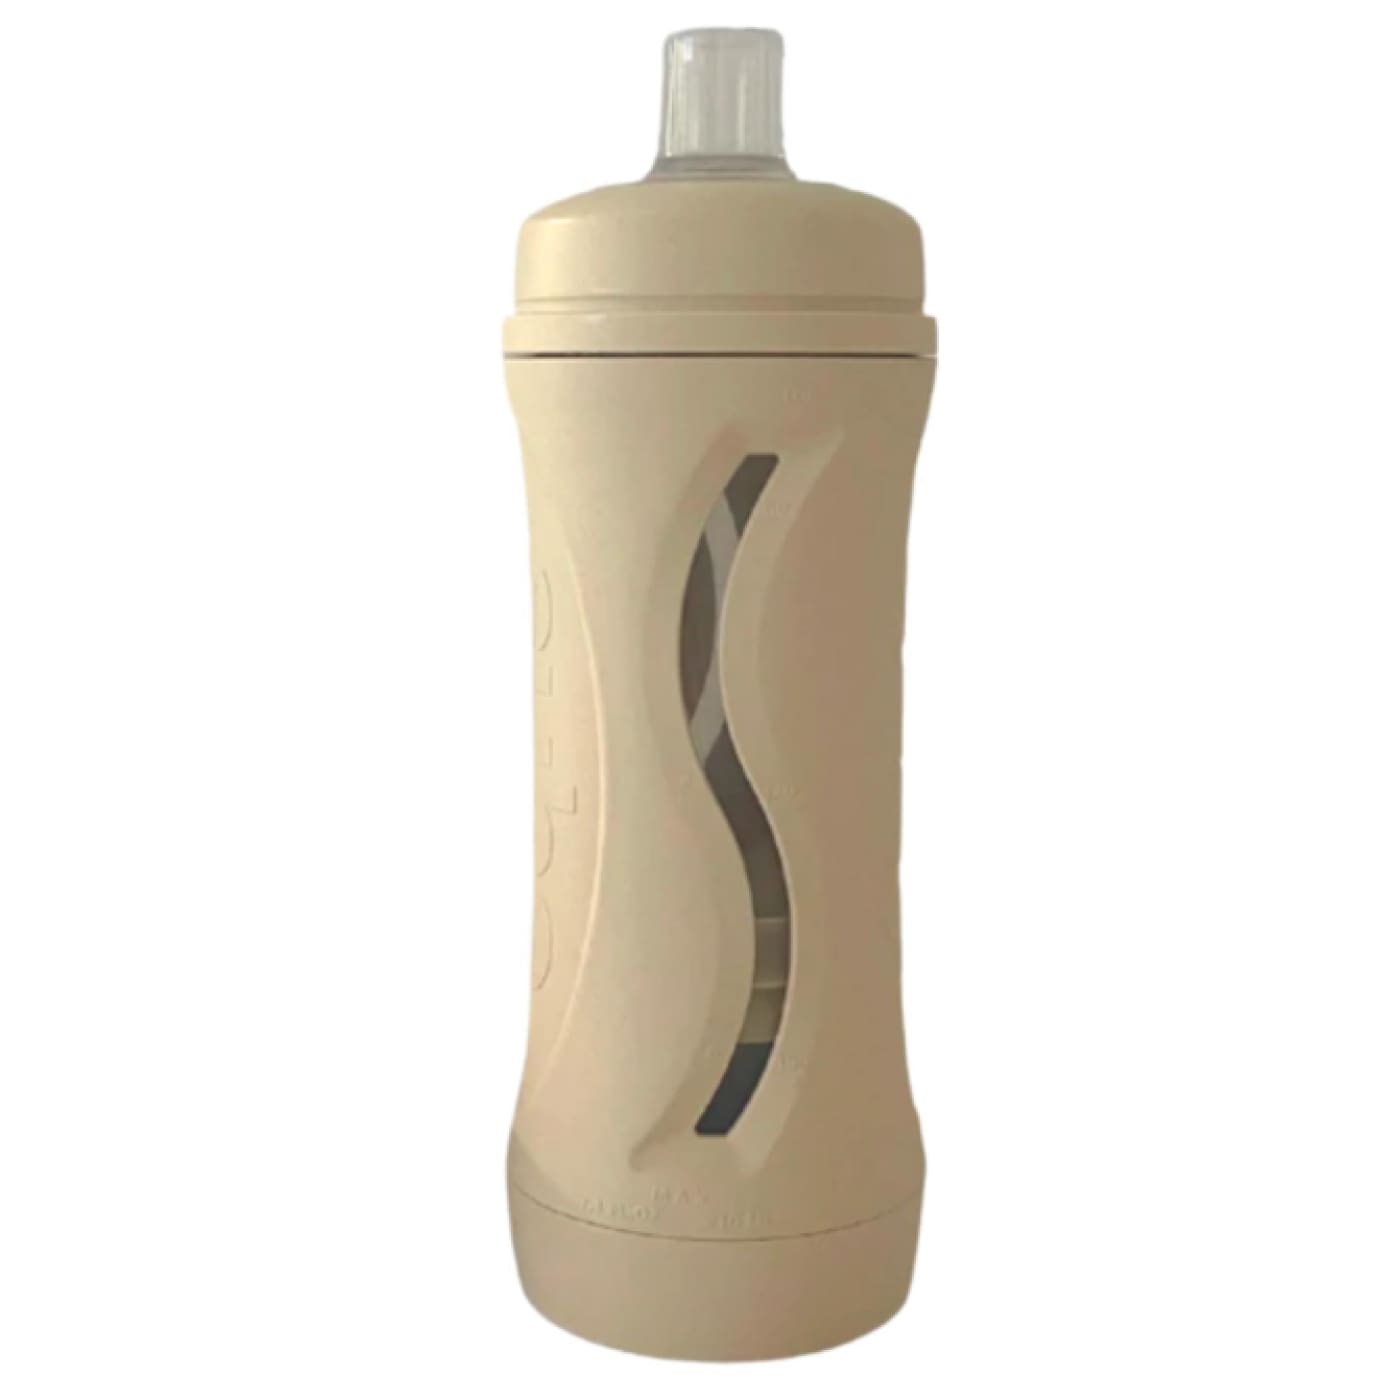 Subo The Food Bottle - Oatmeal - Oatmeal - NURSING & FEEDING - CONTAINERS/FEEDERS